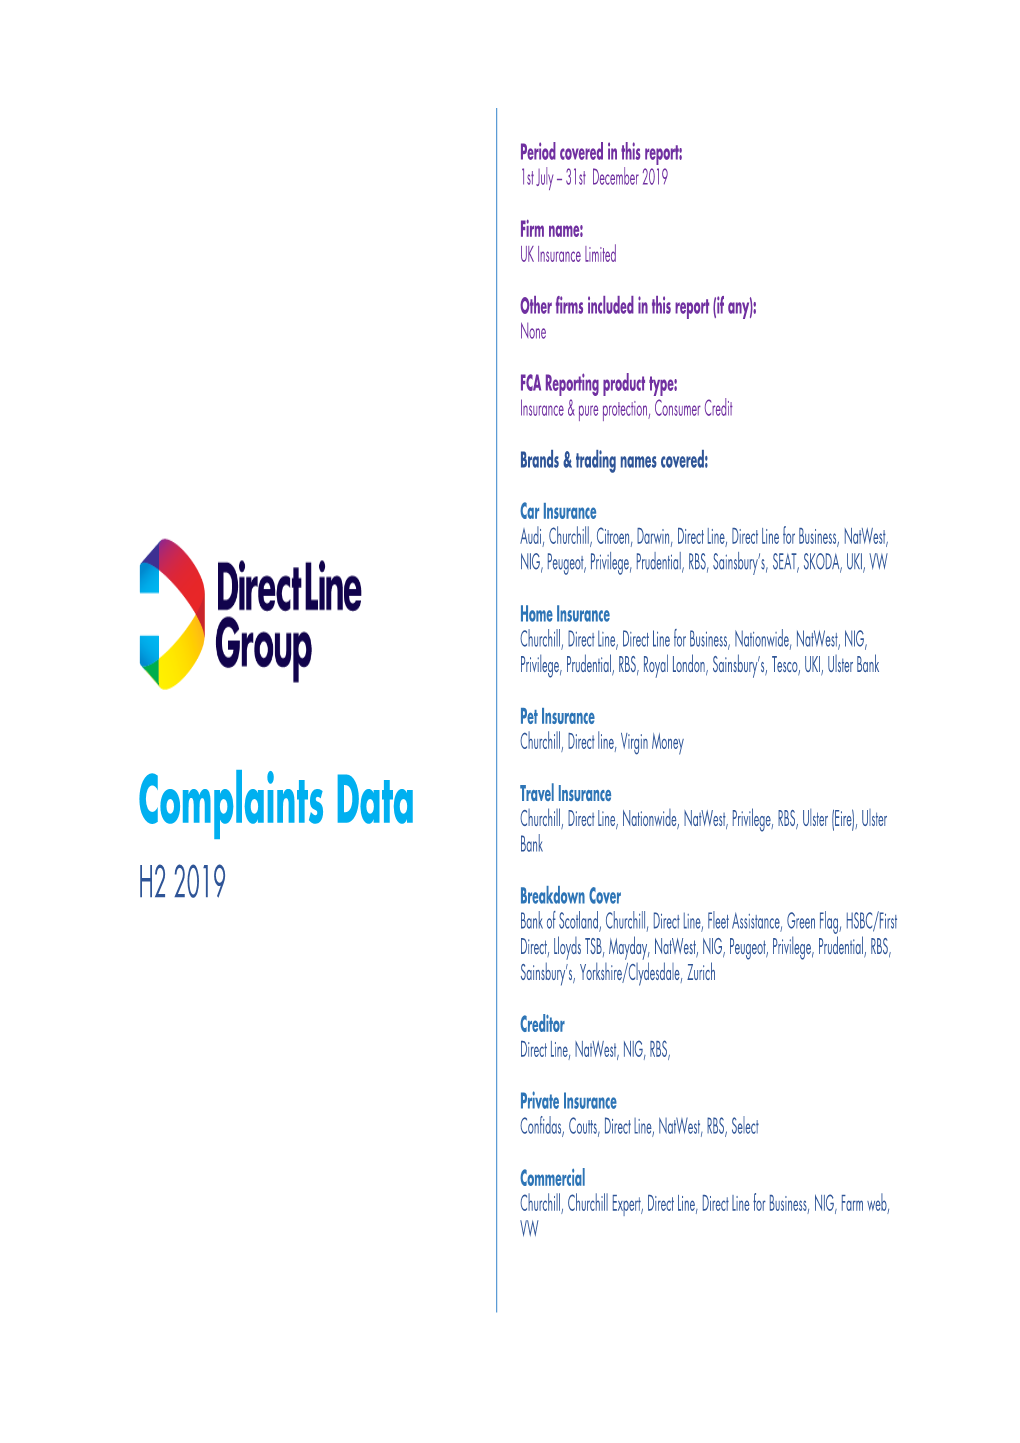 Complaints Data Churchill, Direct Line, Nationwide, Natwest, Privilege, RBS, Ulster (Eire), Ulster Bank